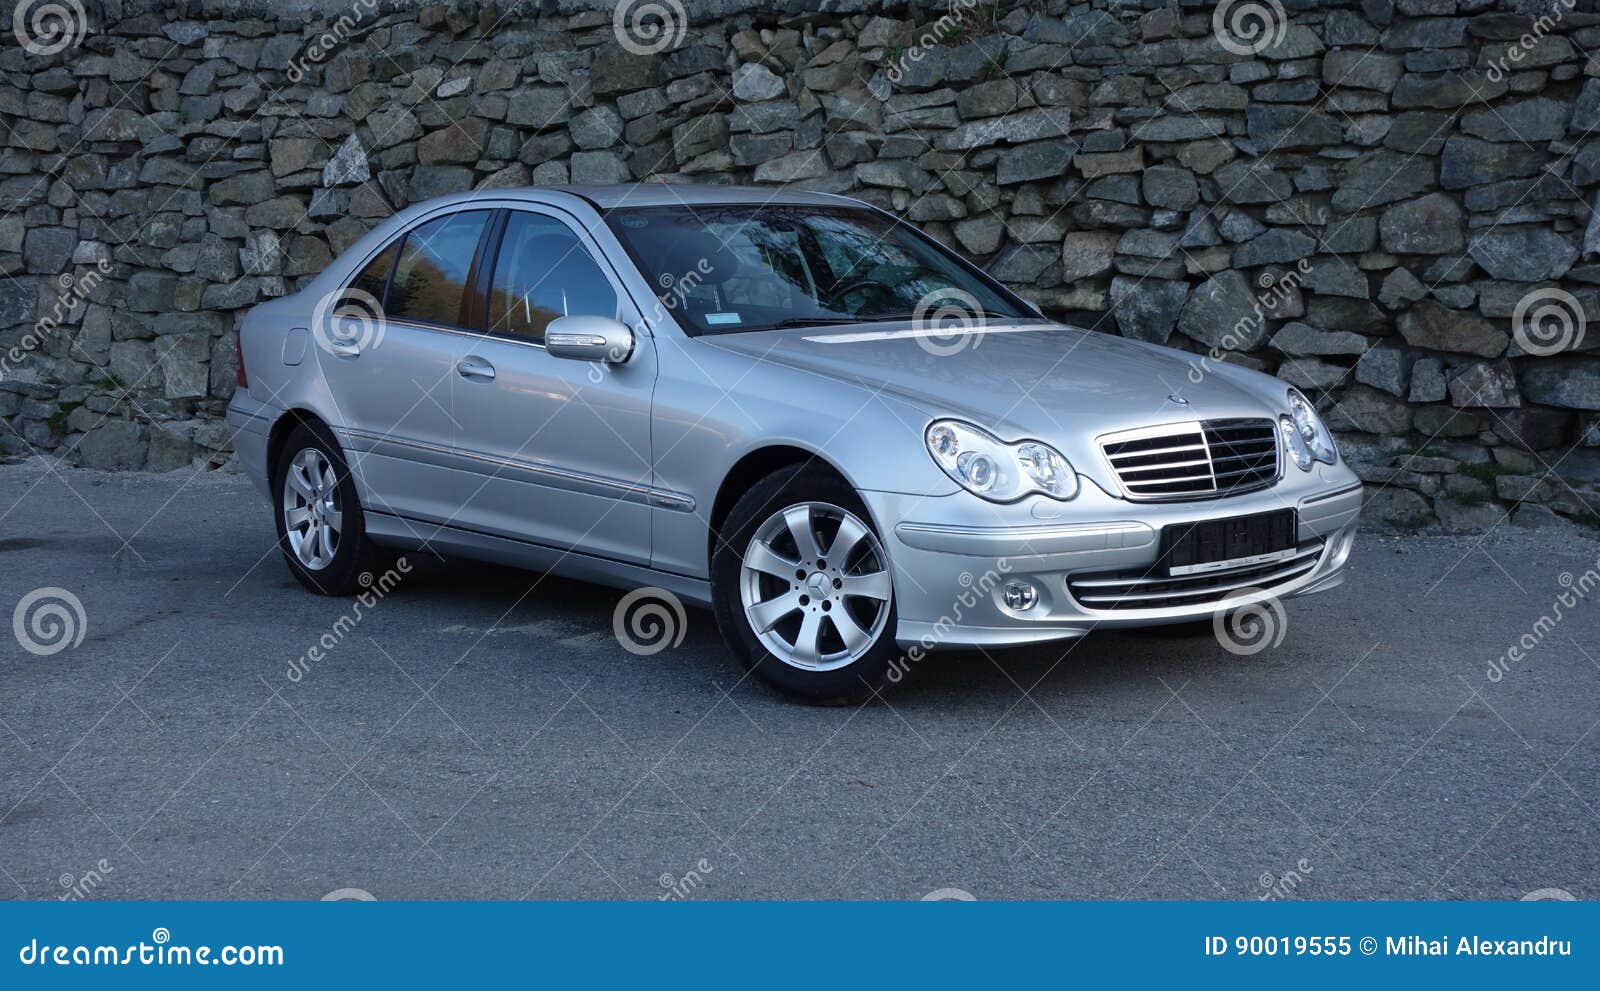 Cluj Napoca/Romania-March 31, 2017: Mercedes Benz W203 - Year 2005,  Avantgarde Equipment, Silver Metallic Paint Near a Rock Wall P Editorial  Image - Image of blue, class: 90019555